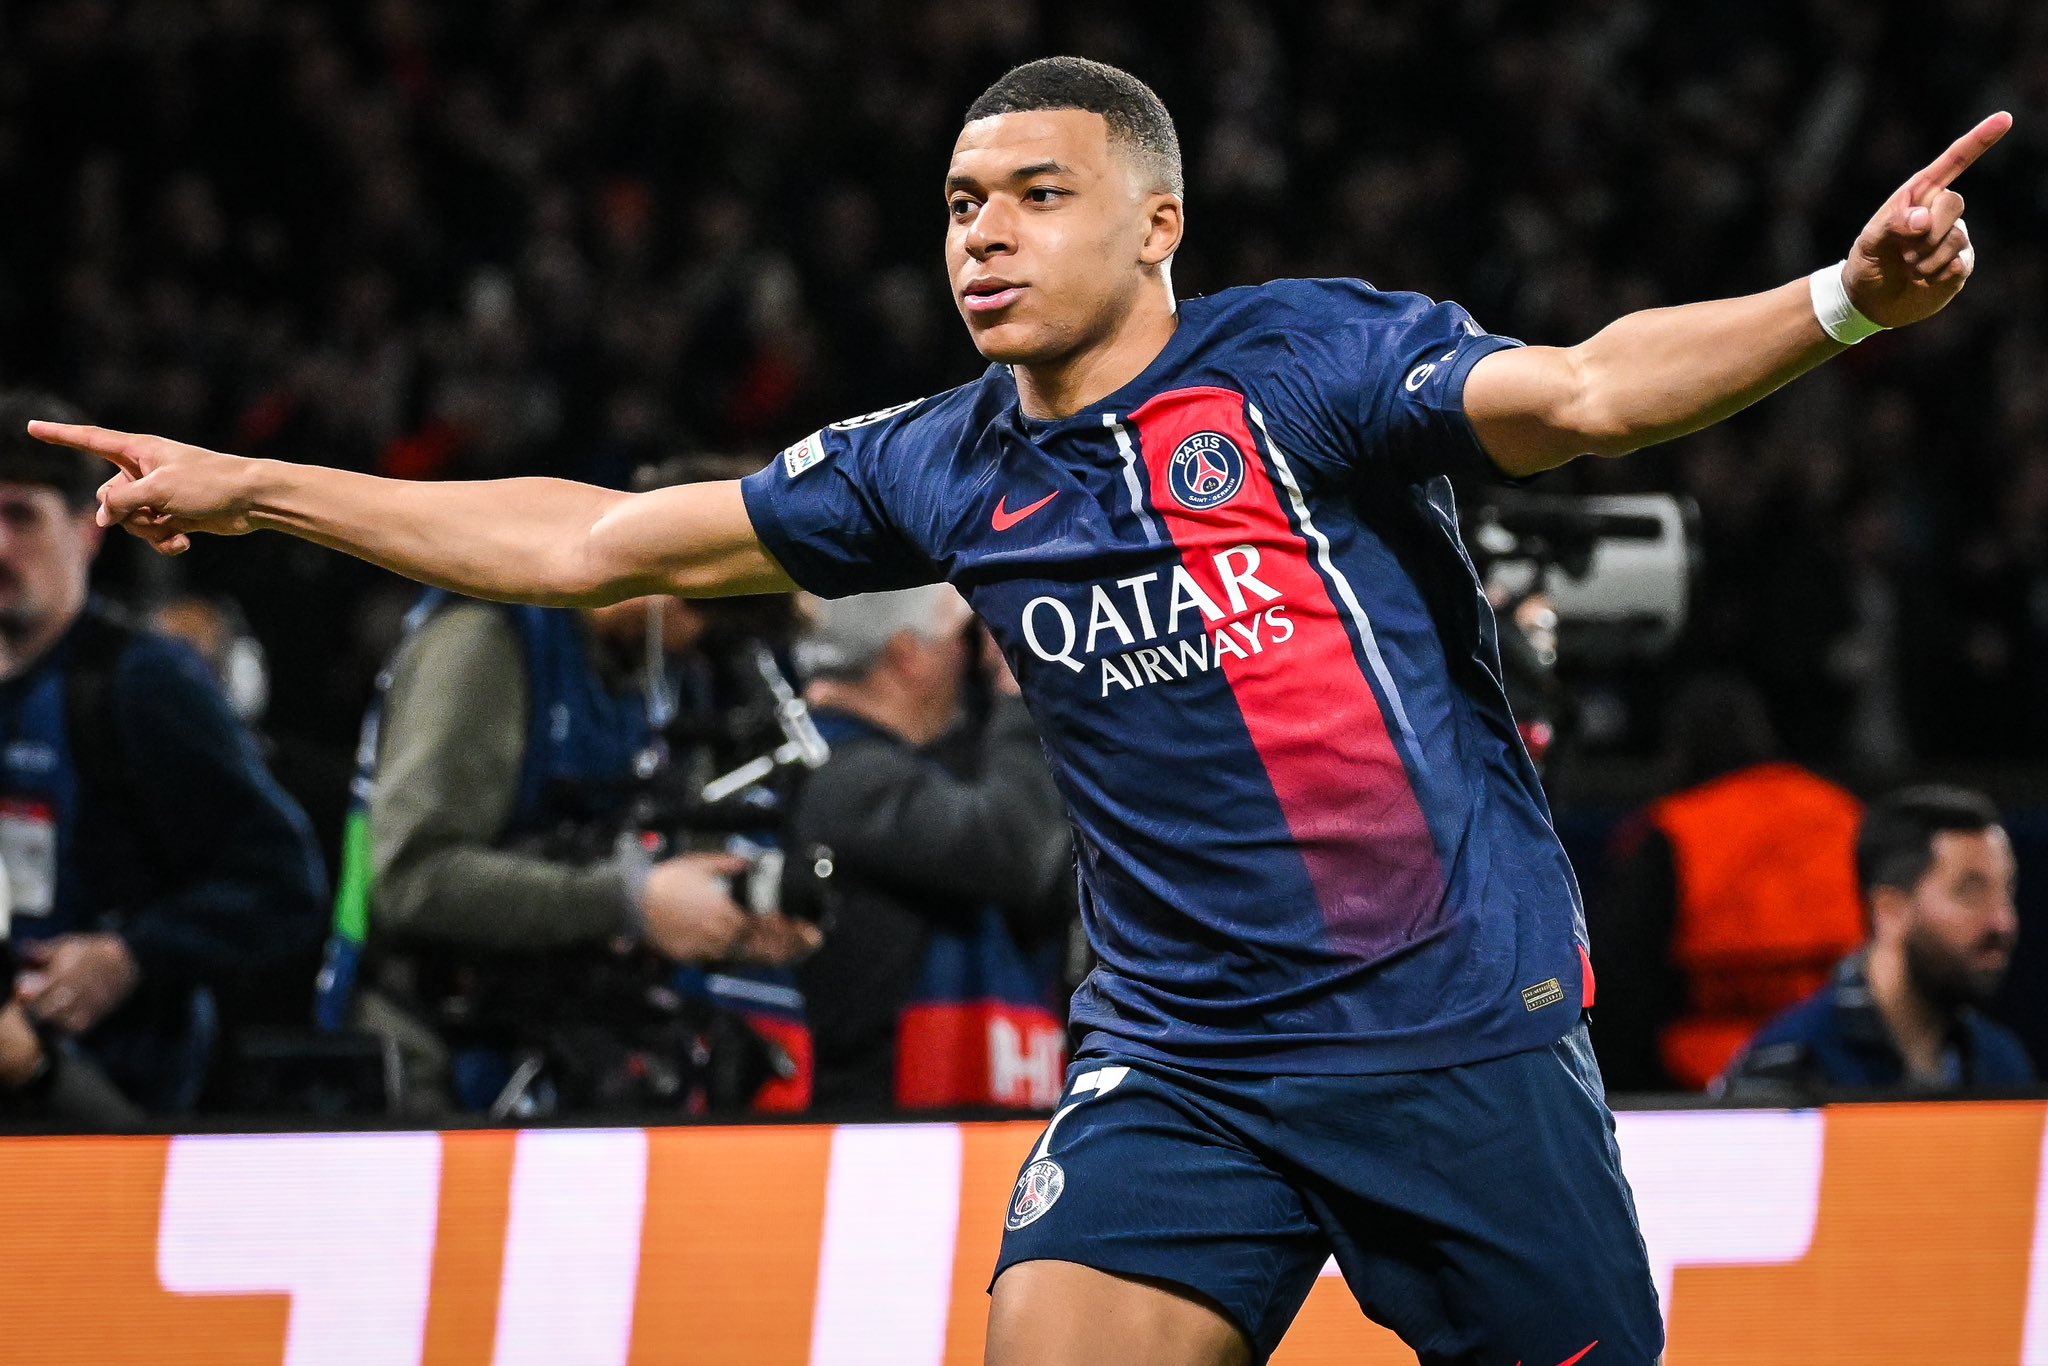 Kylian Mbappe has told Real Madrid he wants to join this summer, PSG departure was decided “weeks ago”